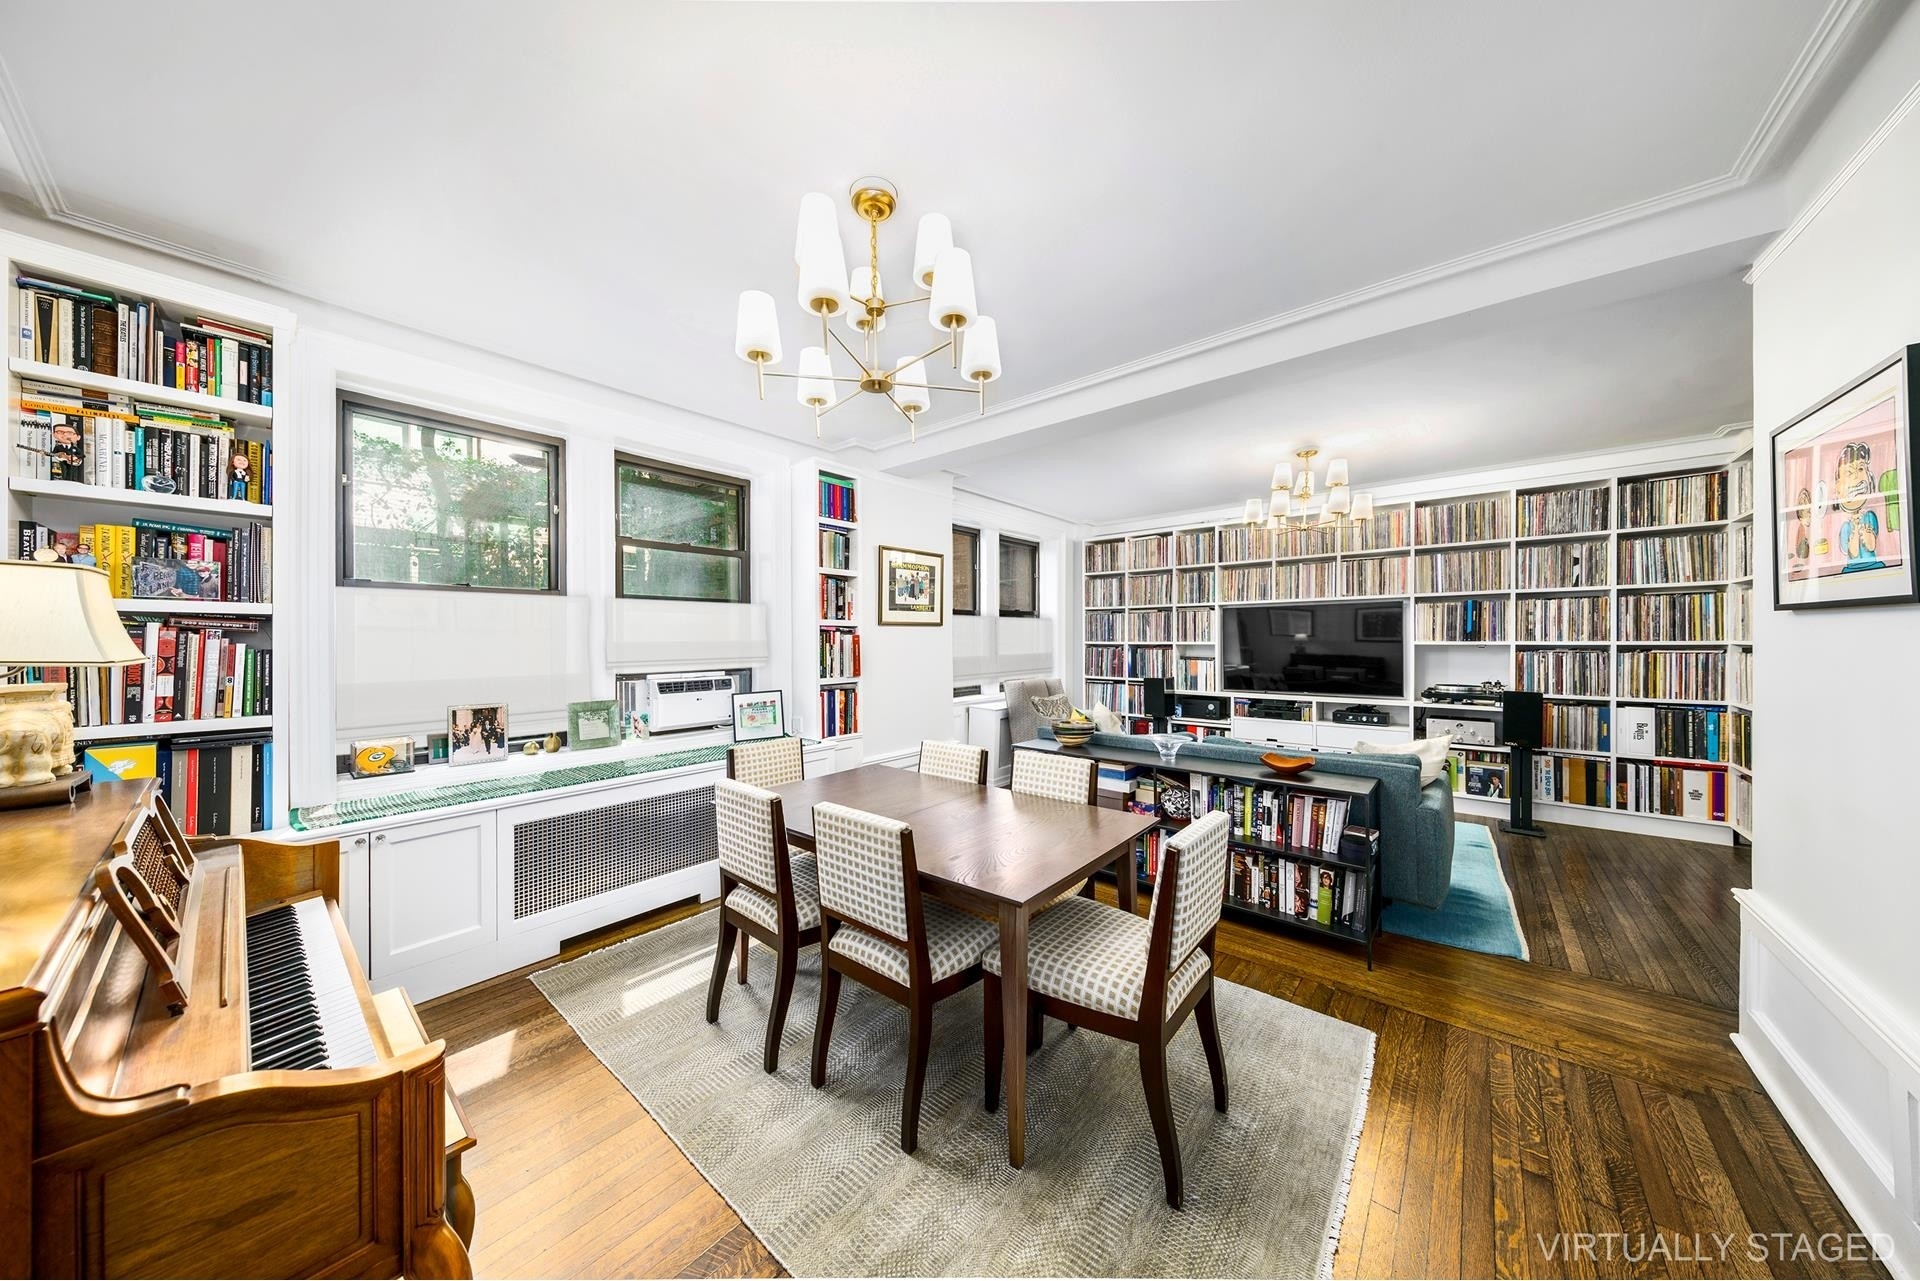 Co-op Properties for Sale at 119 W 71ST ST, 2C Lincoln Square, New York, NY 10023